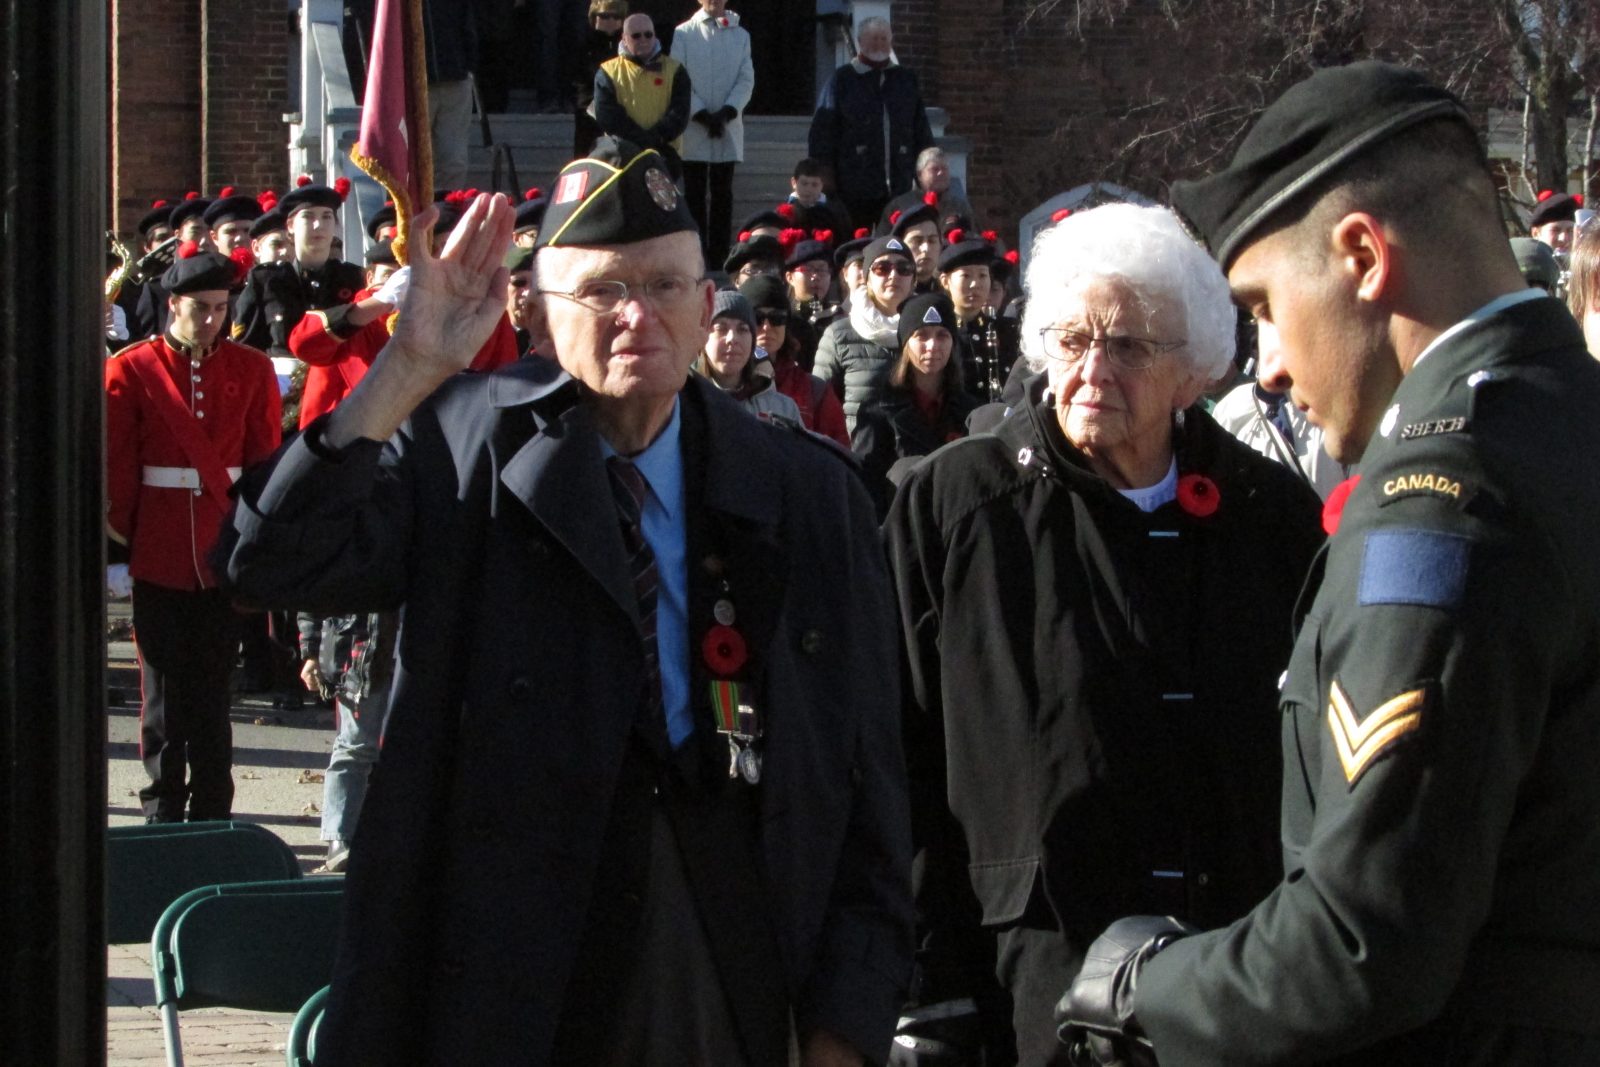 Lest we forget: Remembrance ceremonies held in Lennoxville and Sherbrooke